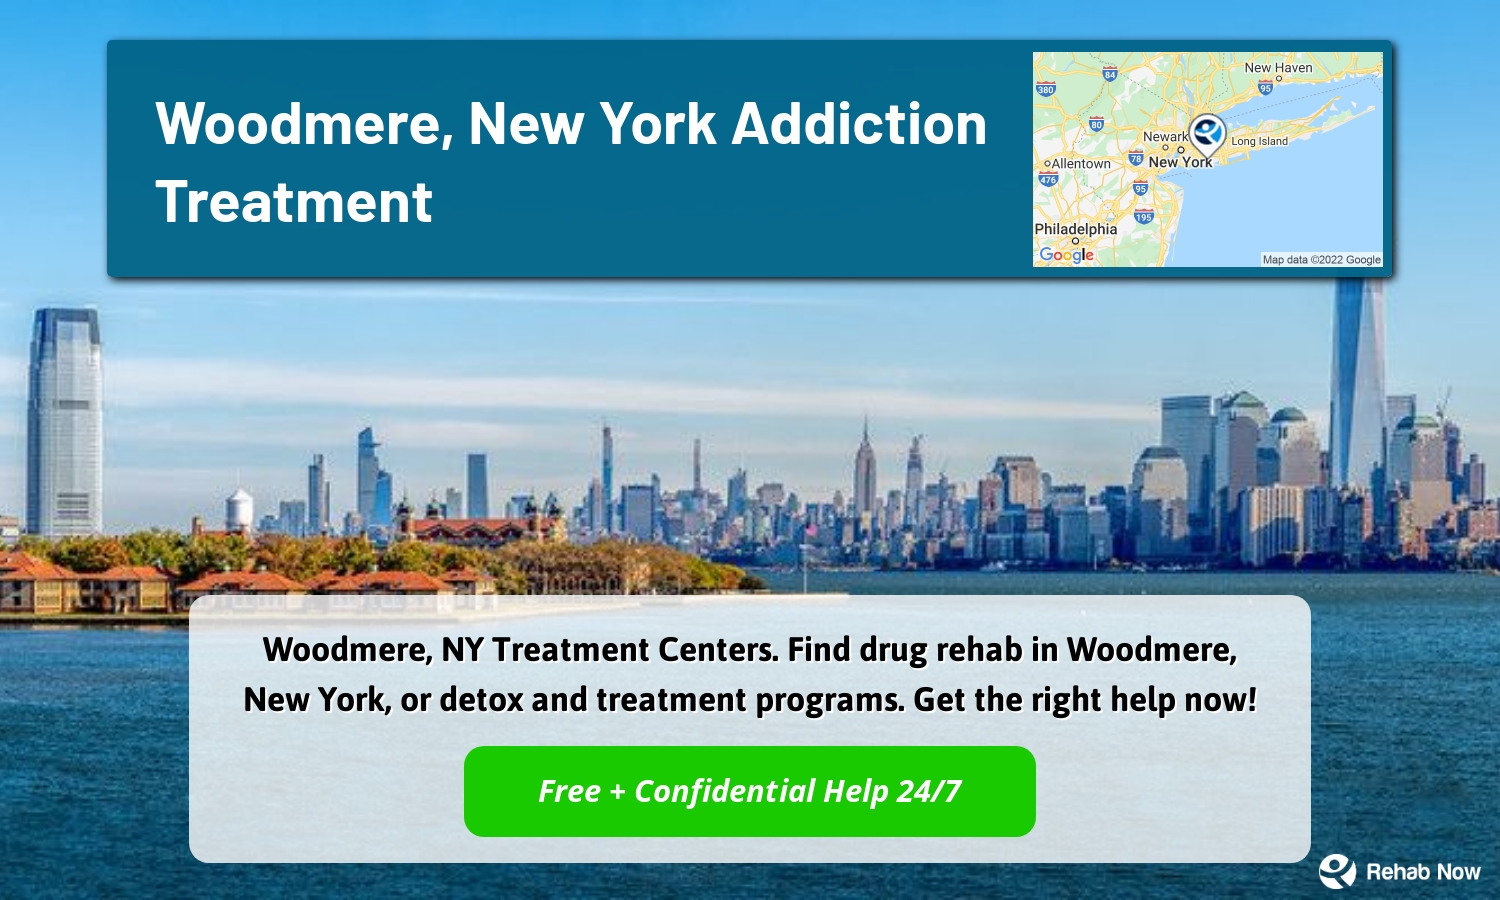 Woodmere, NY Treatment Centers. Find drug rehab in Woodmere, New York, or detox and treatment programs. Get the right help now!